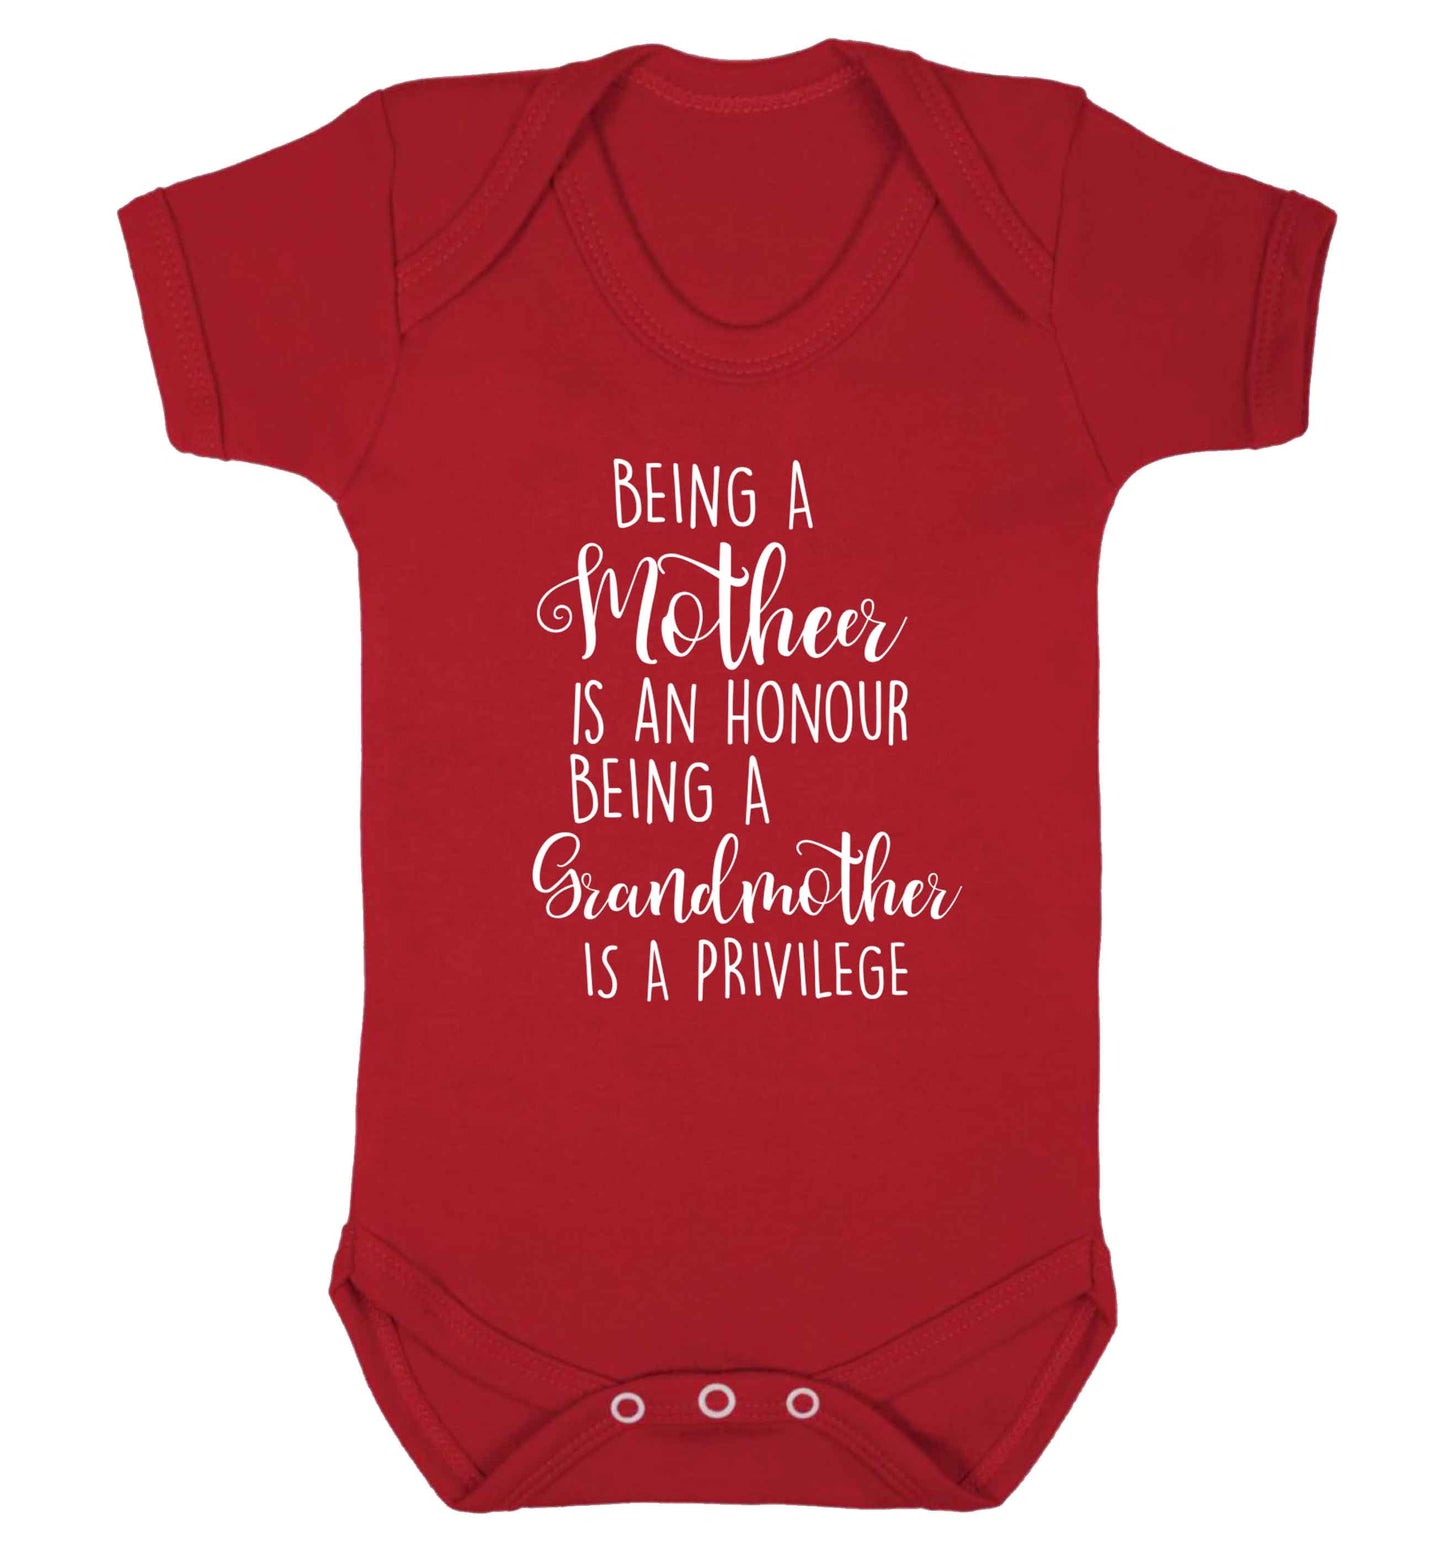 Being a mother is an honour being an grandmother is a privilege Baby Vest red 18-24 months